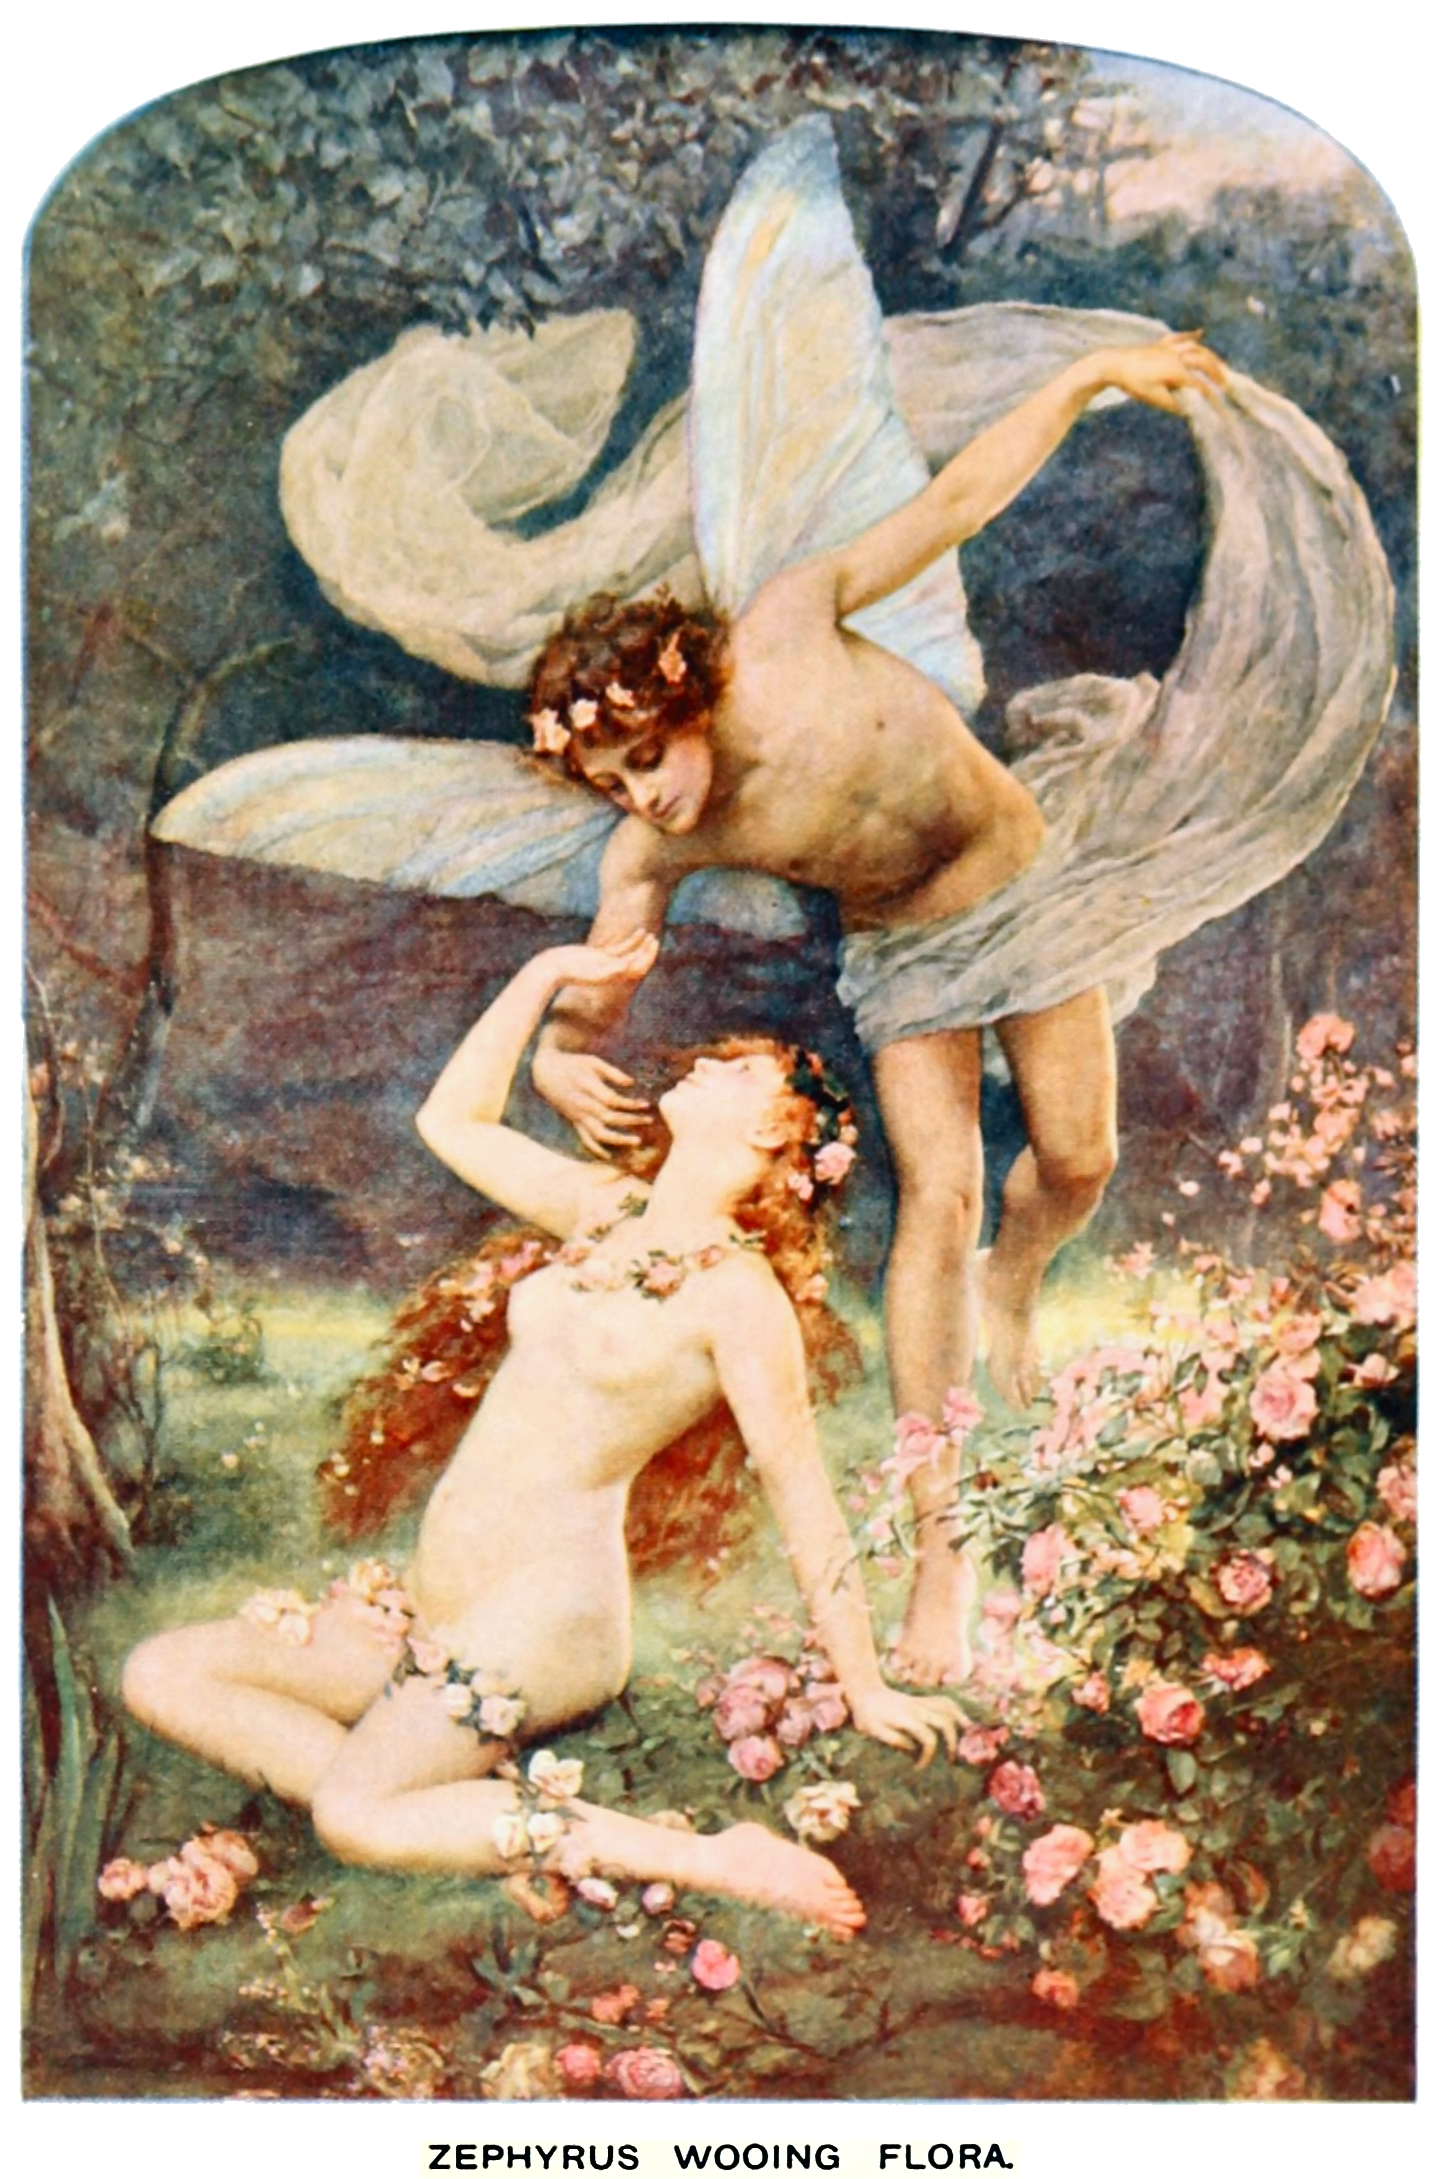 Zephyrus, god of the west wind, was associated with spring, and one of his wives became Flora, the goddess of flowers.